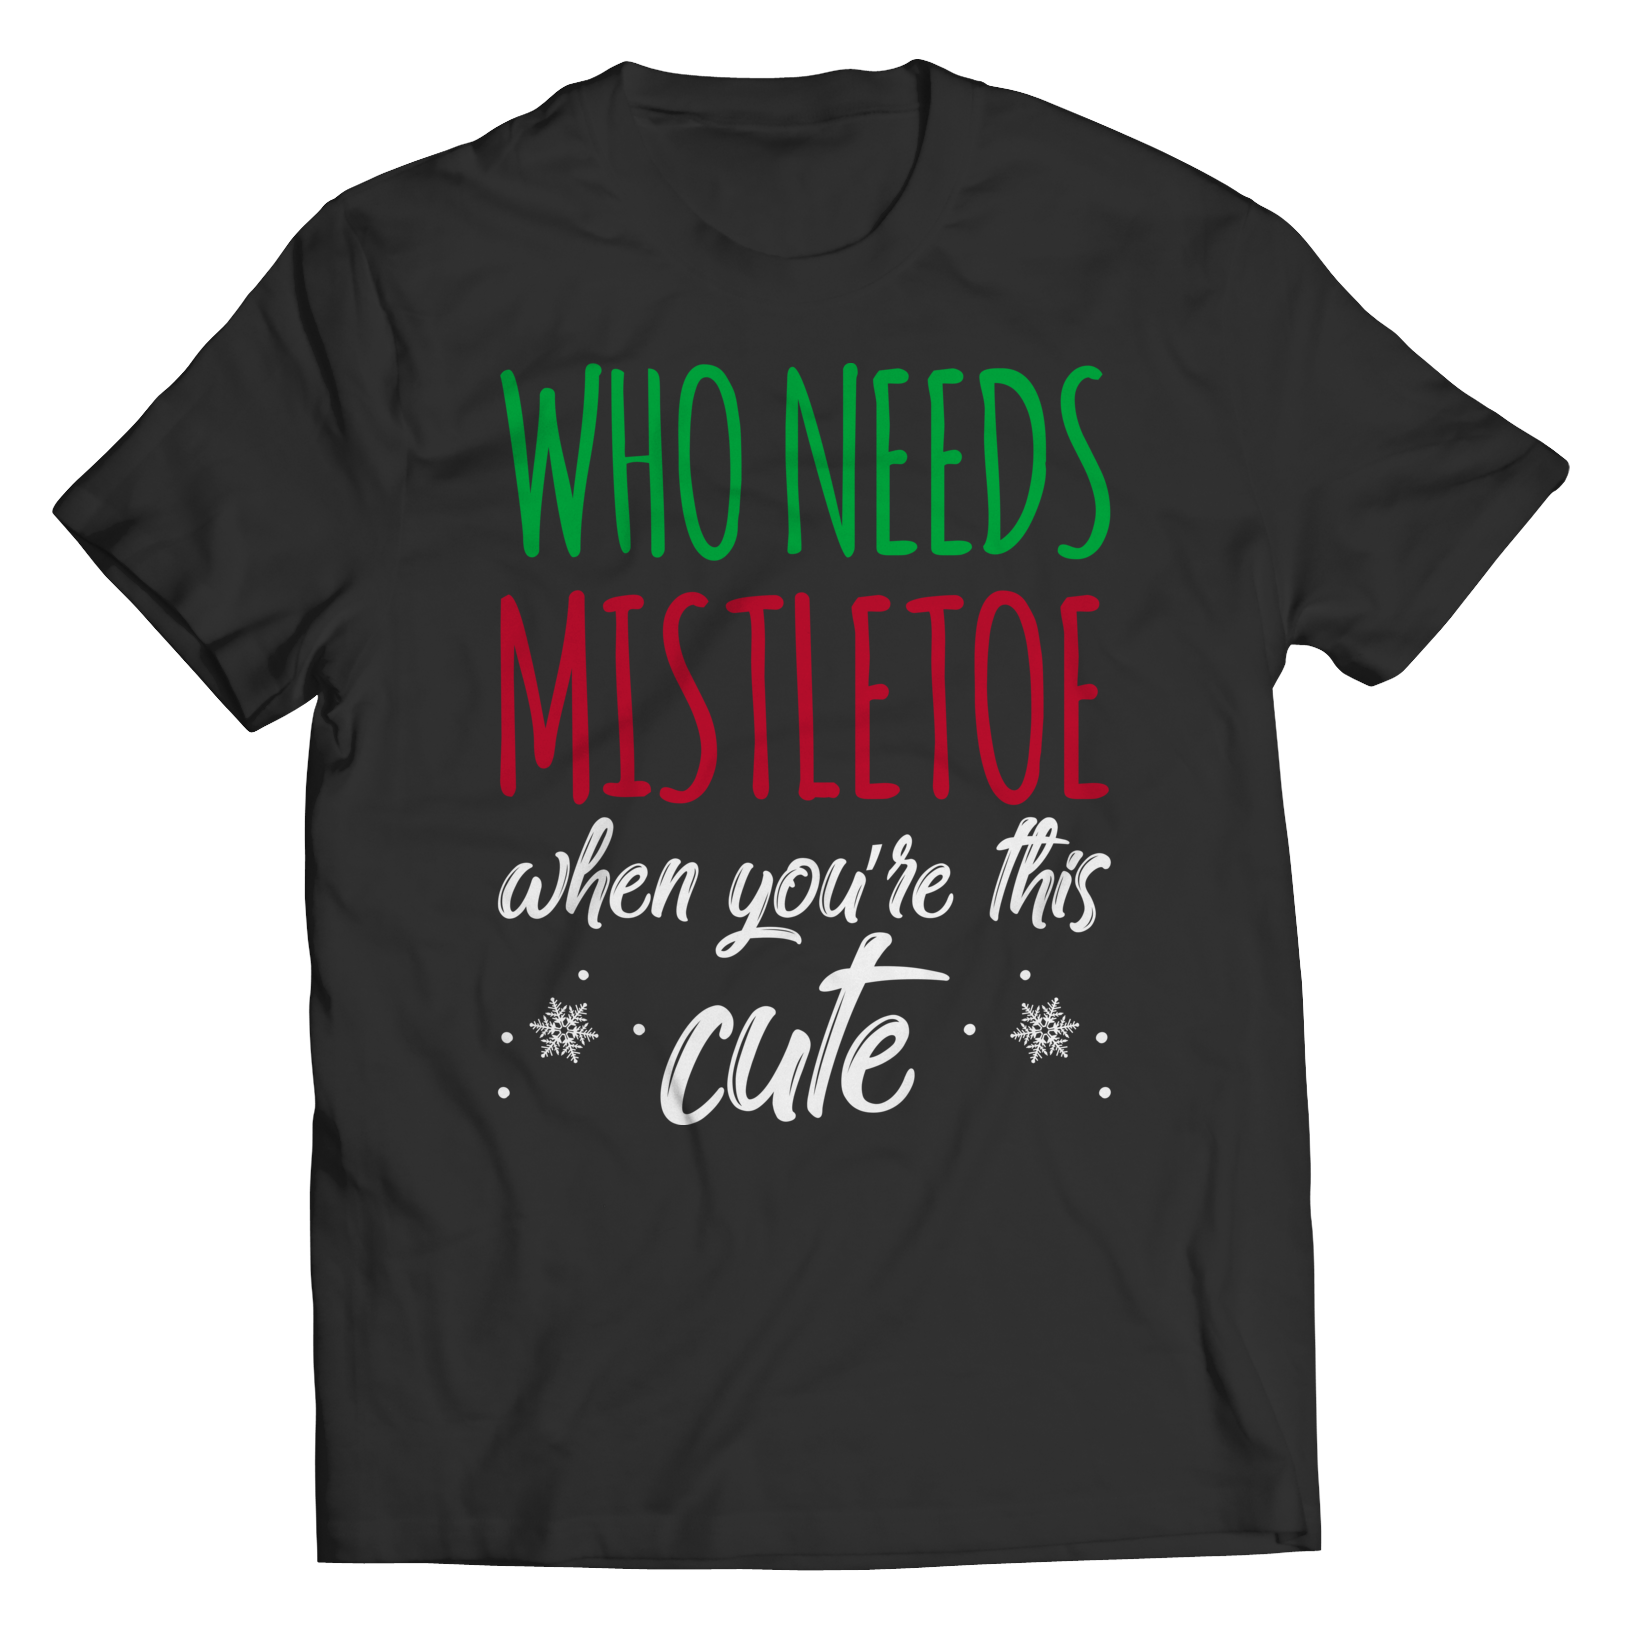 Who Needs Mistletoe When You're This Cute Unisex T-Shirt